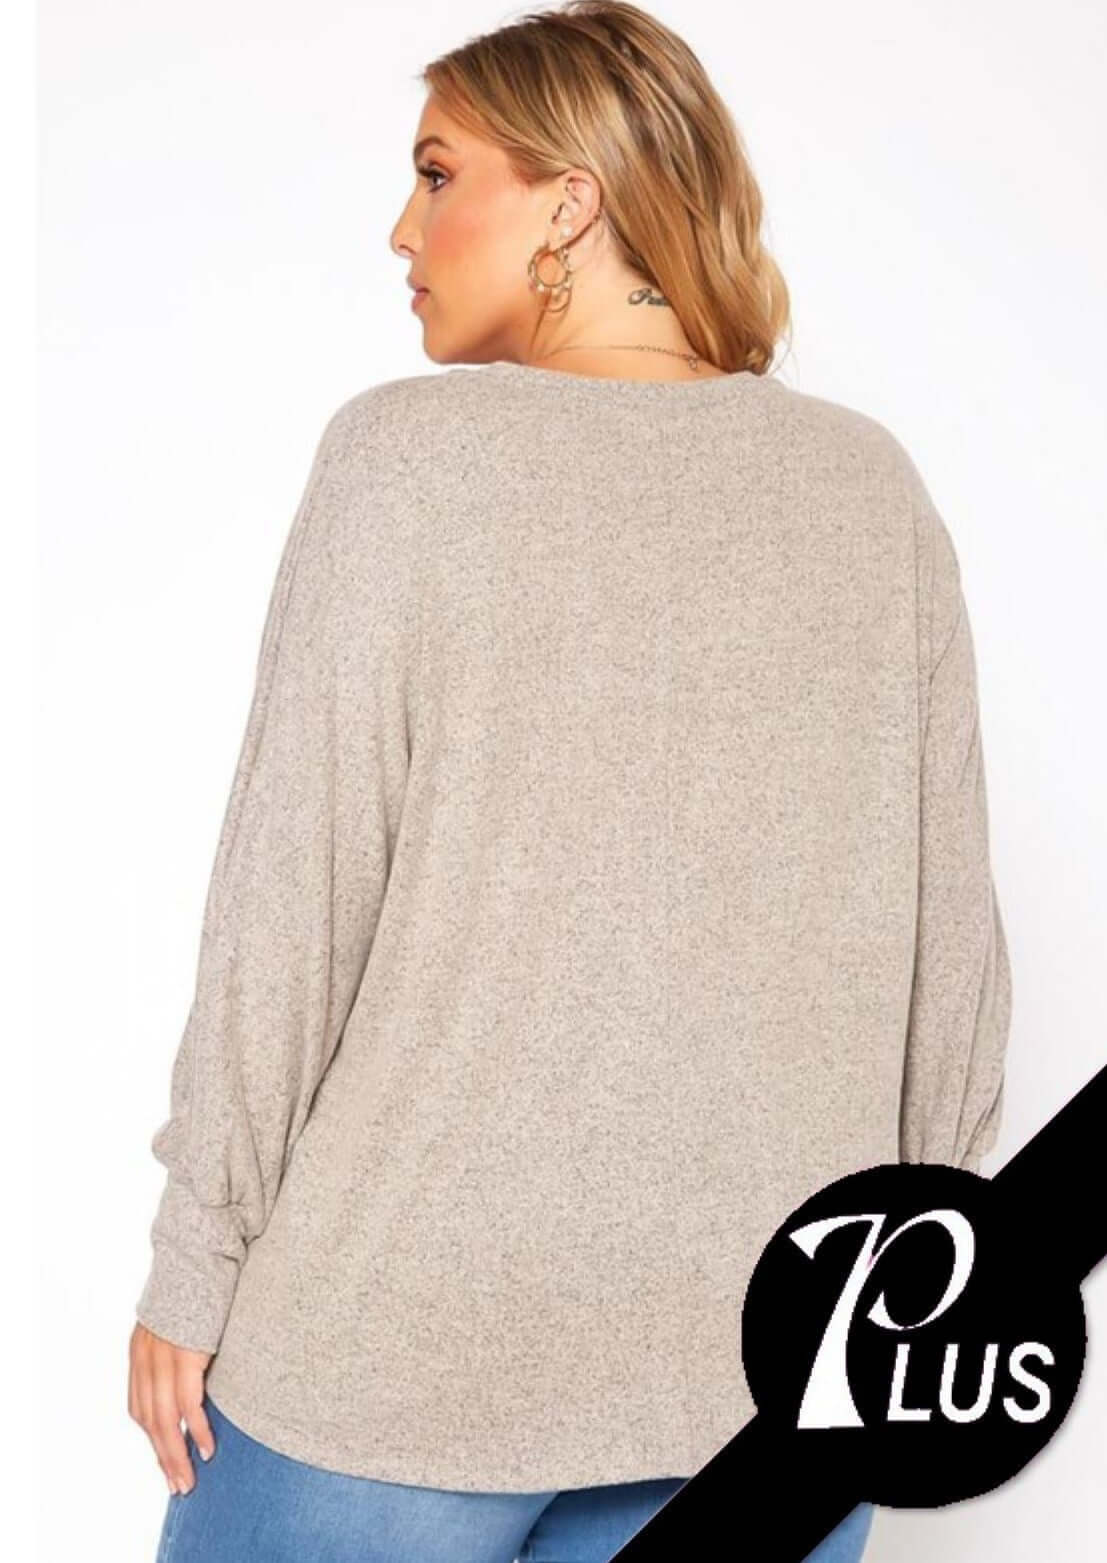 USA Made Soft & Stretchy Oversized Long Sleeve Women's V-Neck Plus Size Top in 2-Tone Oatmeal  | Classy Cozy Cool Women's Made in America Clothing Boutique